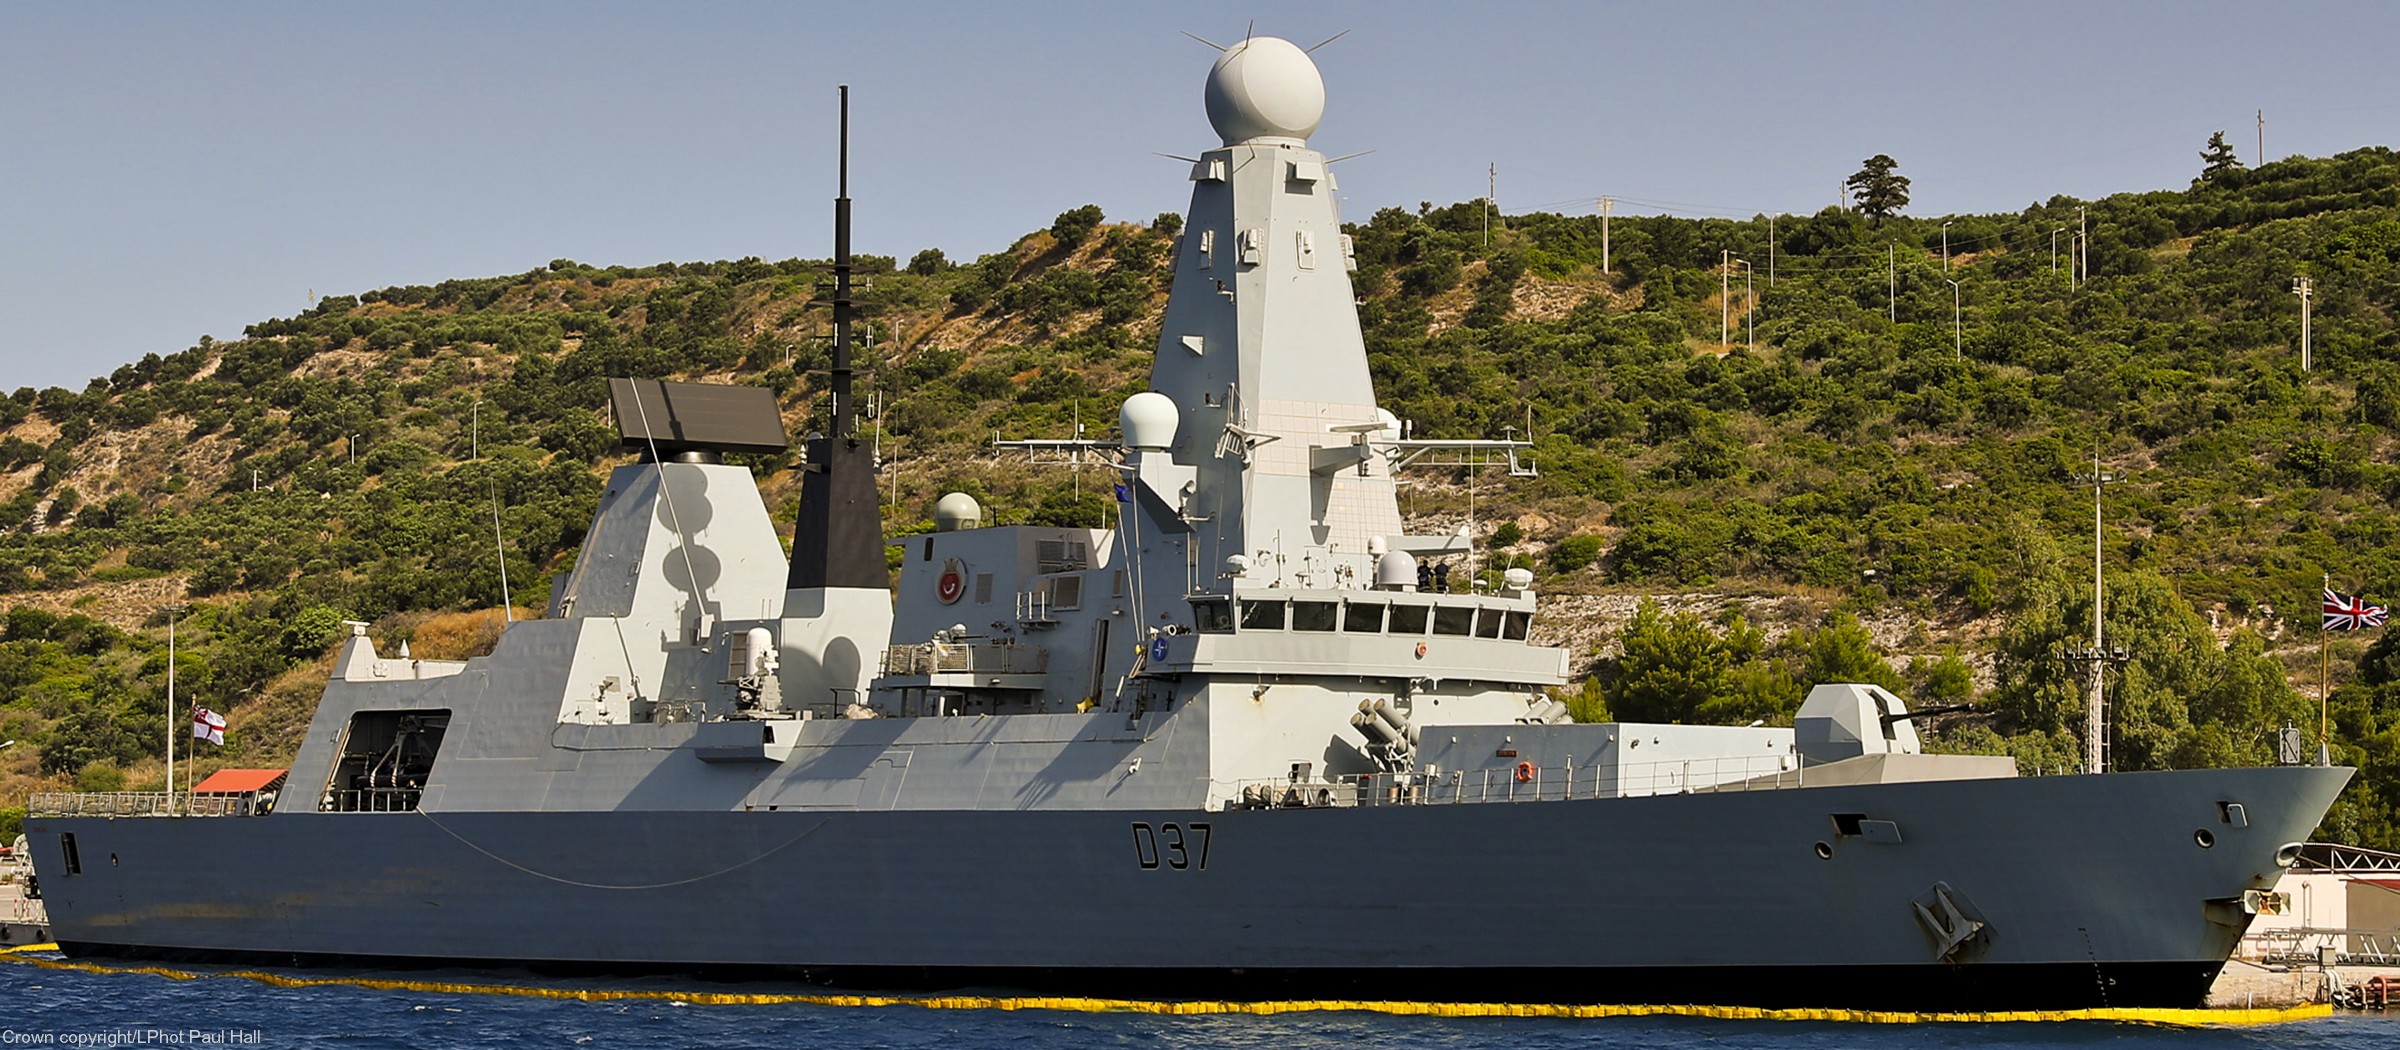 d37 hms duncan d-37 type 45 daring class guided missile destroyer ddg royal navy sea viper 62